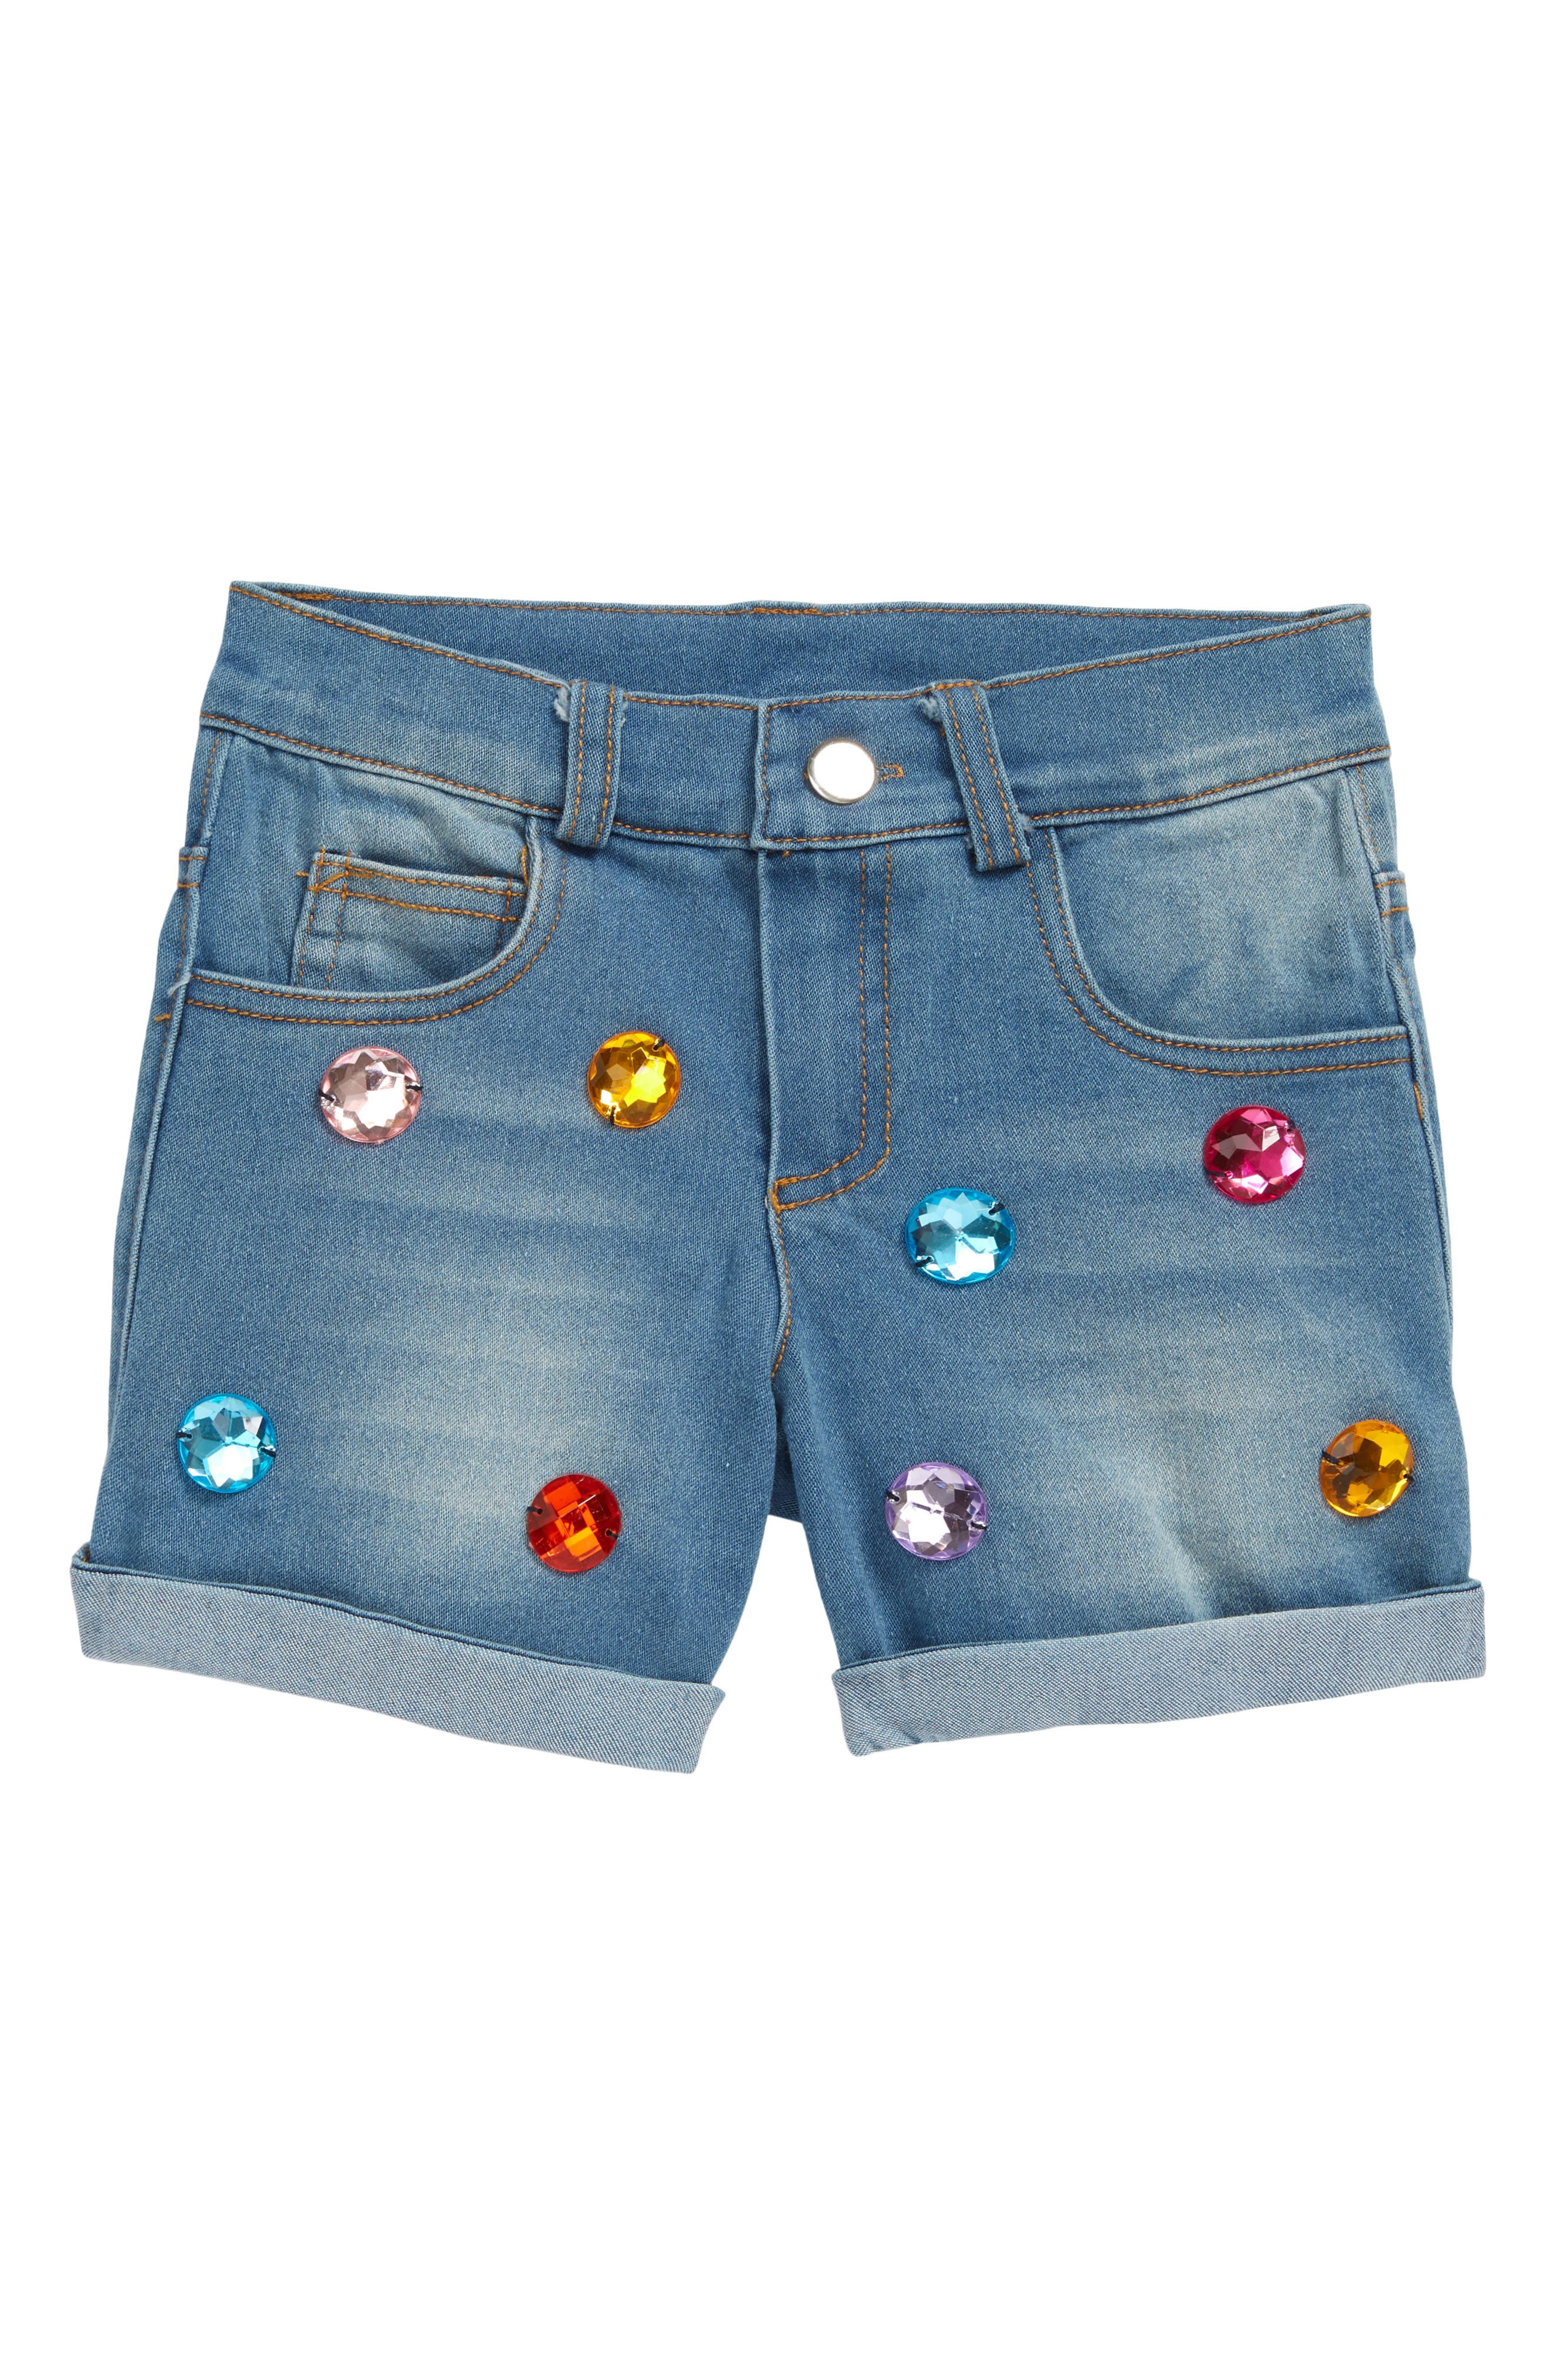 OCEANKIDS Baby Girls Jeans Toddler Baby Clothes Denim Shorts